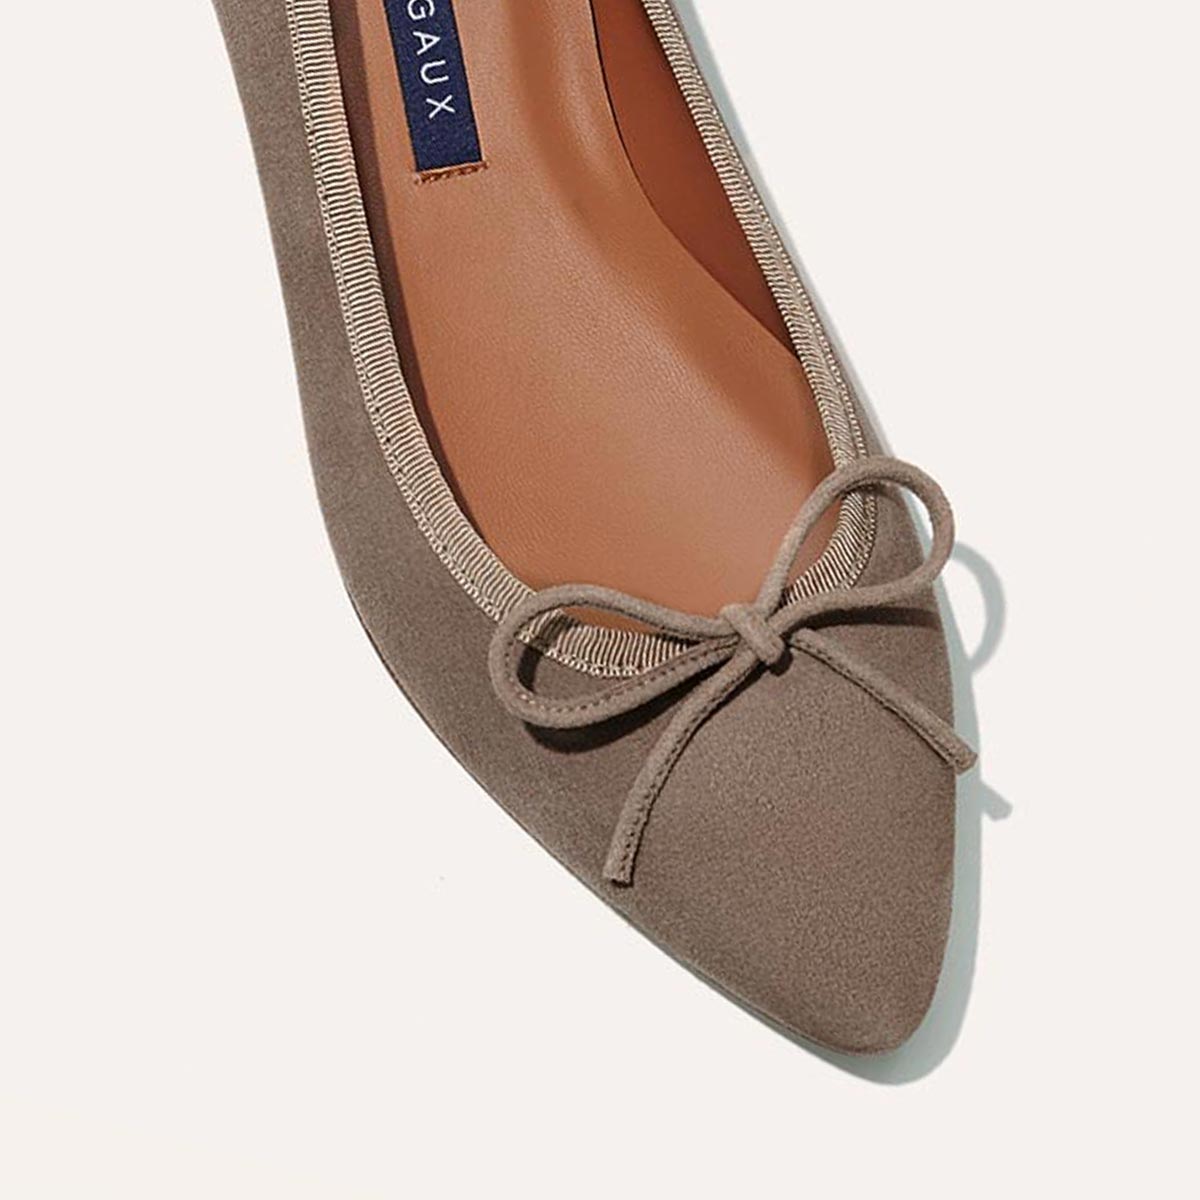 The Pointe - Taupe Suede